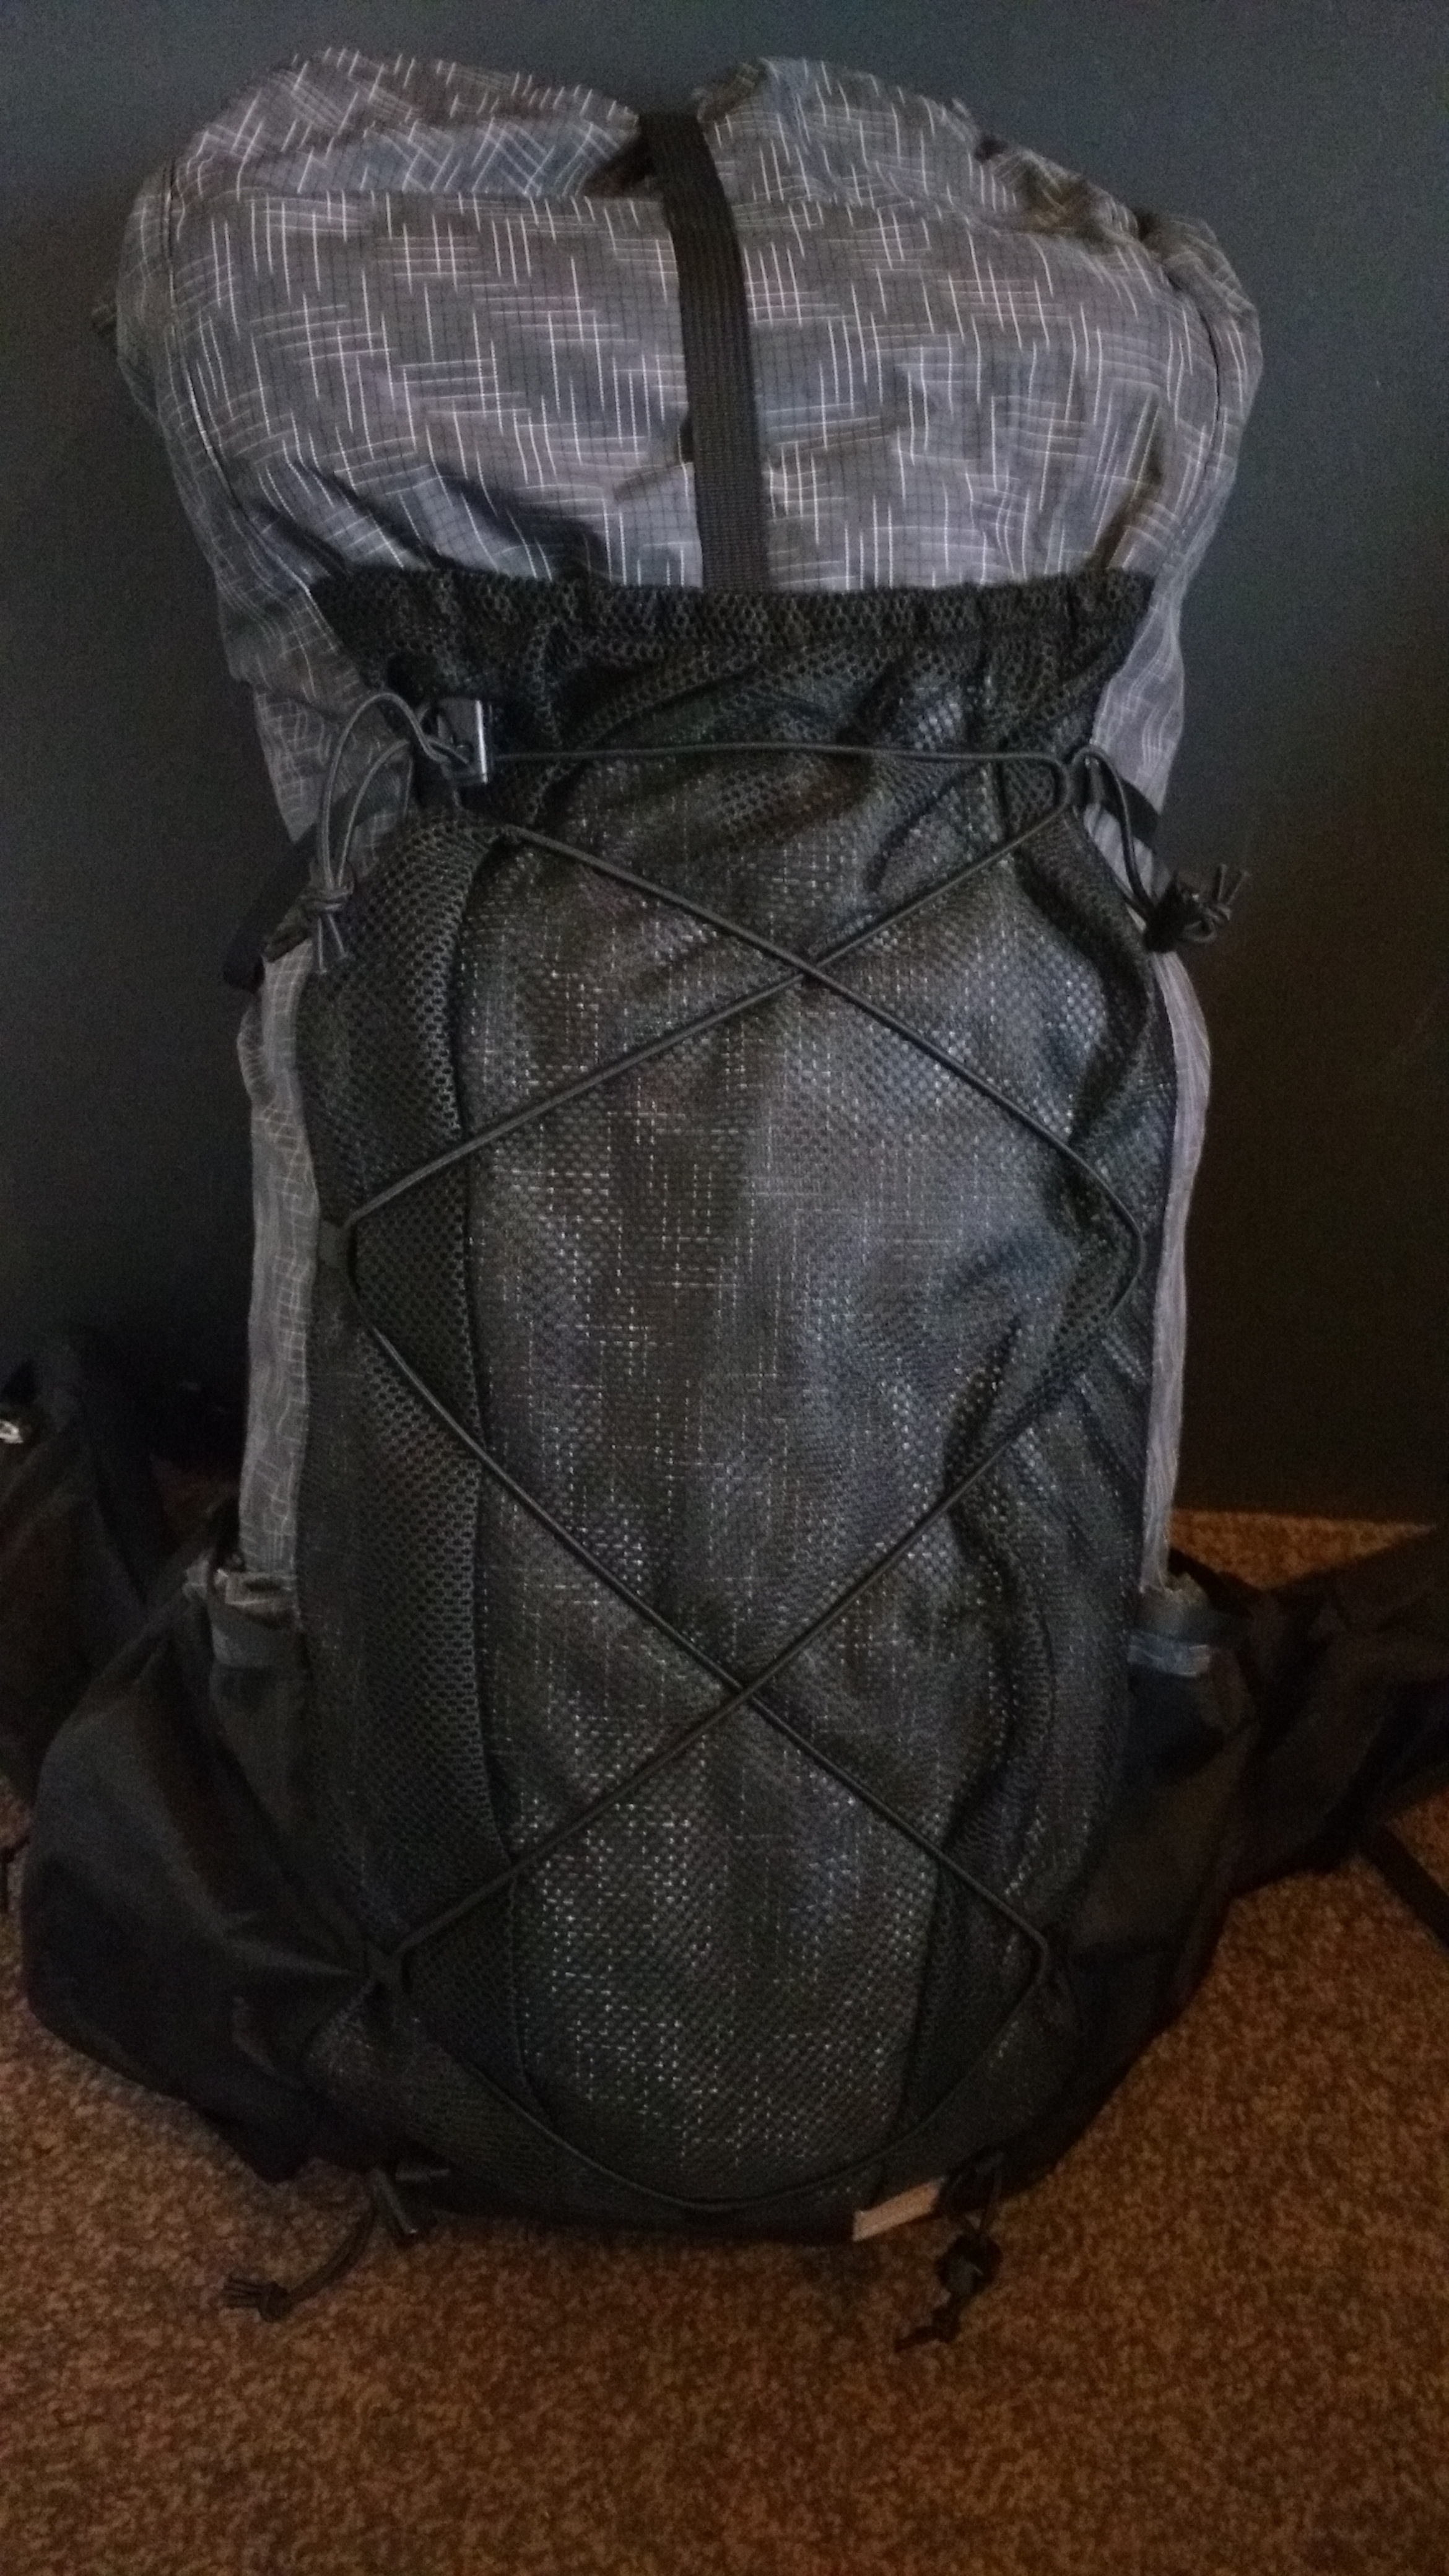 3F UL Backpack Review . Thrifty Hiker, Saving Money On The Trail